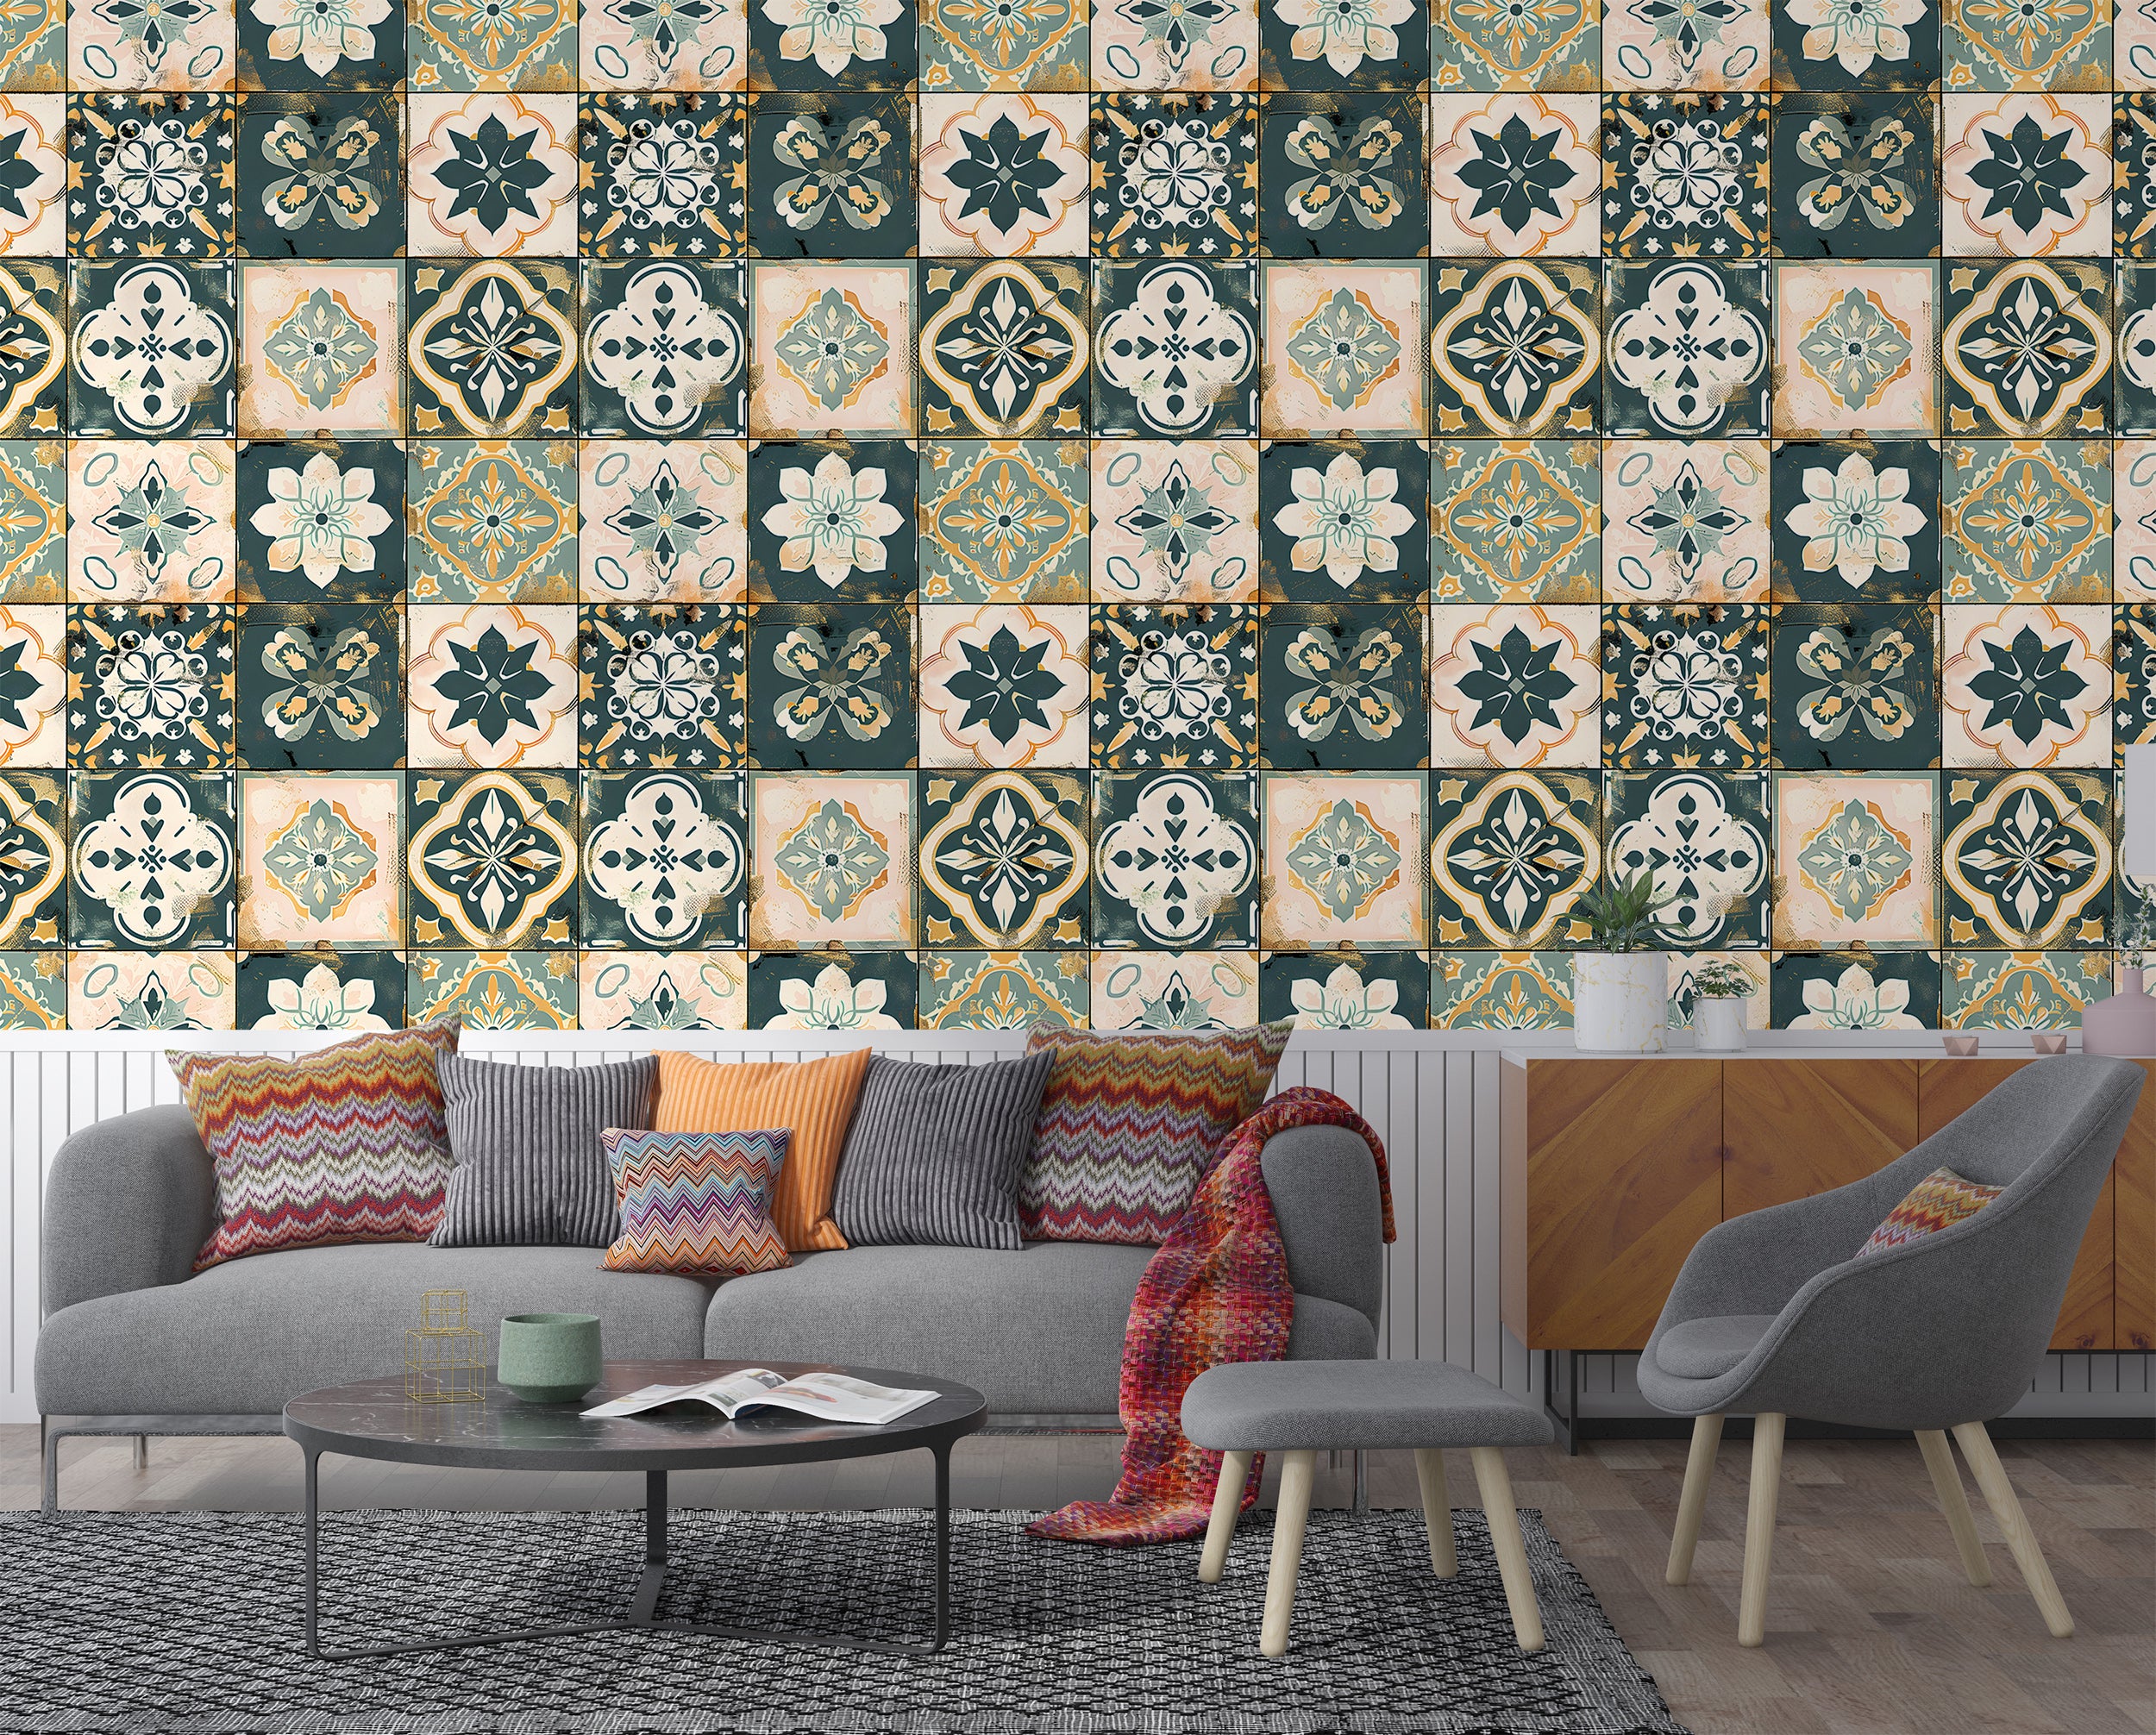 Patchwork Tiles Wallpaper, Peel and Stick Moroccan Wall Decal, Removable Floral Tile Style Wallpaper, Rustic Colors Vintage Wall Decor